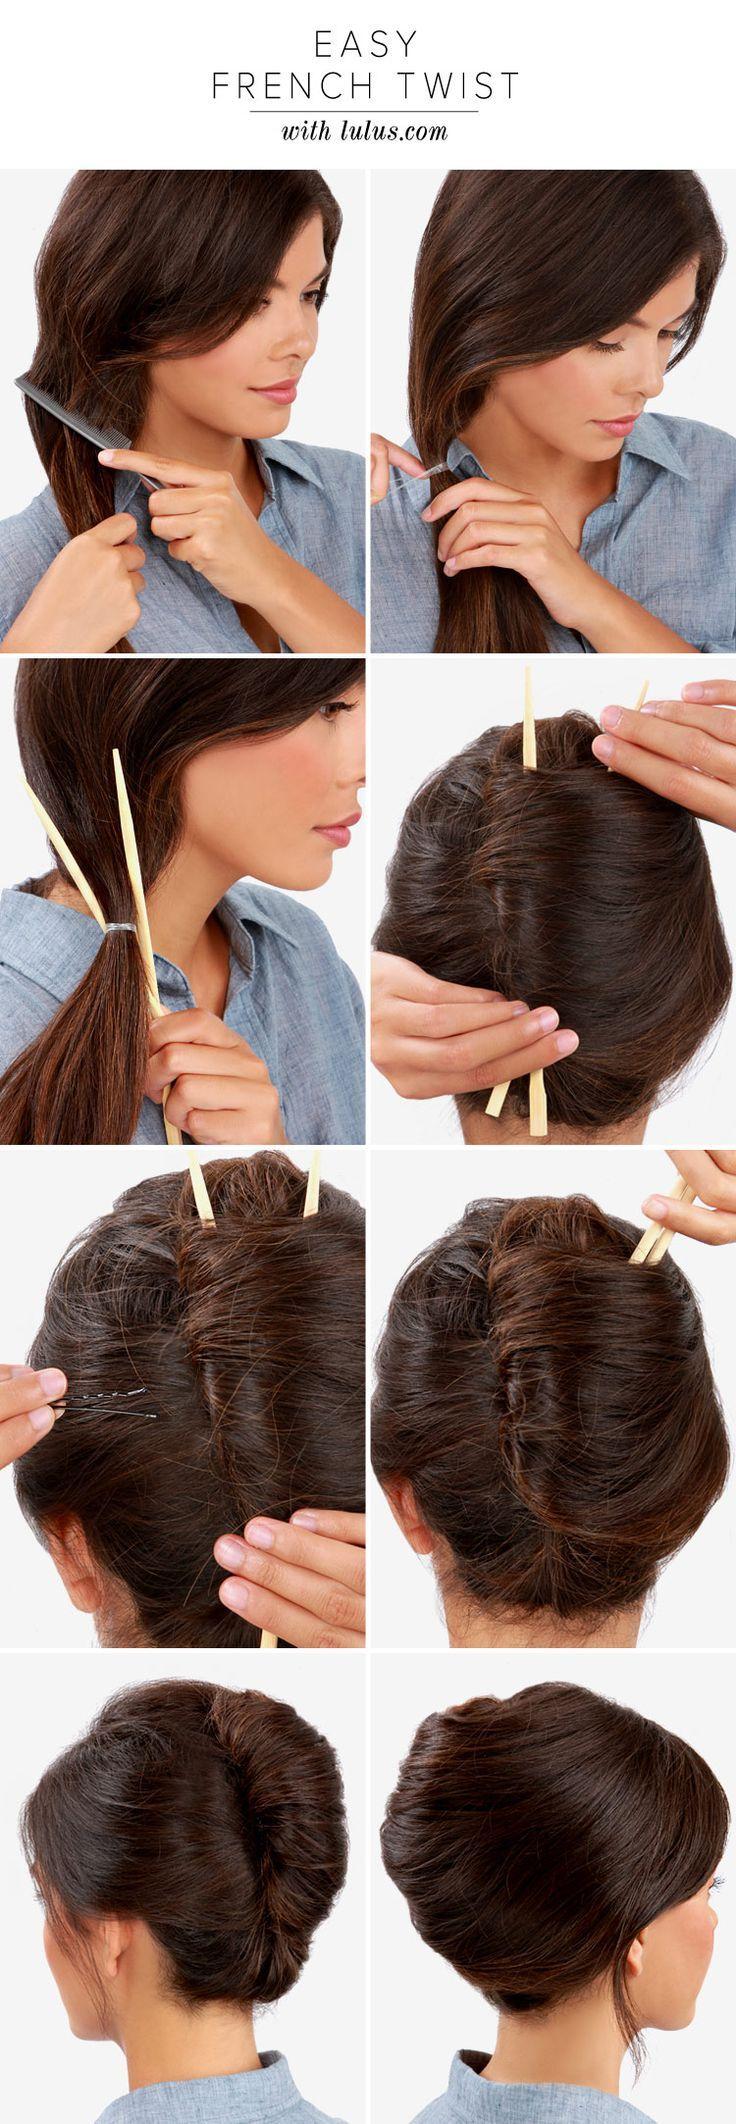 Свадьба - If You've Ever Wondered How To Achieve The Perfect French Twist We Have Just The Guide For You! Check Out How To Use Chopsticks To Create This Chic Look!